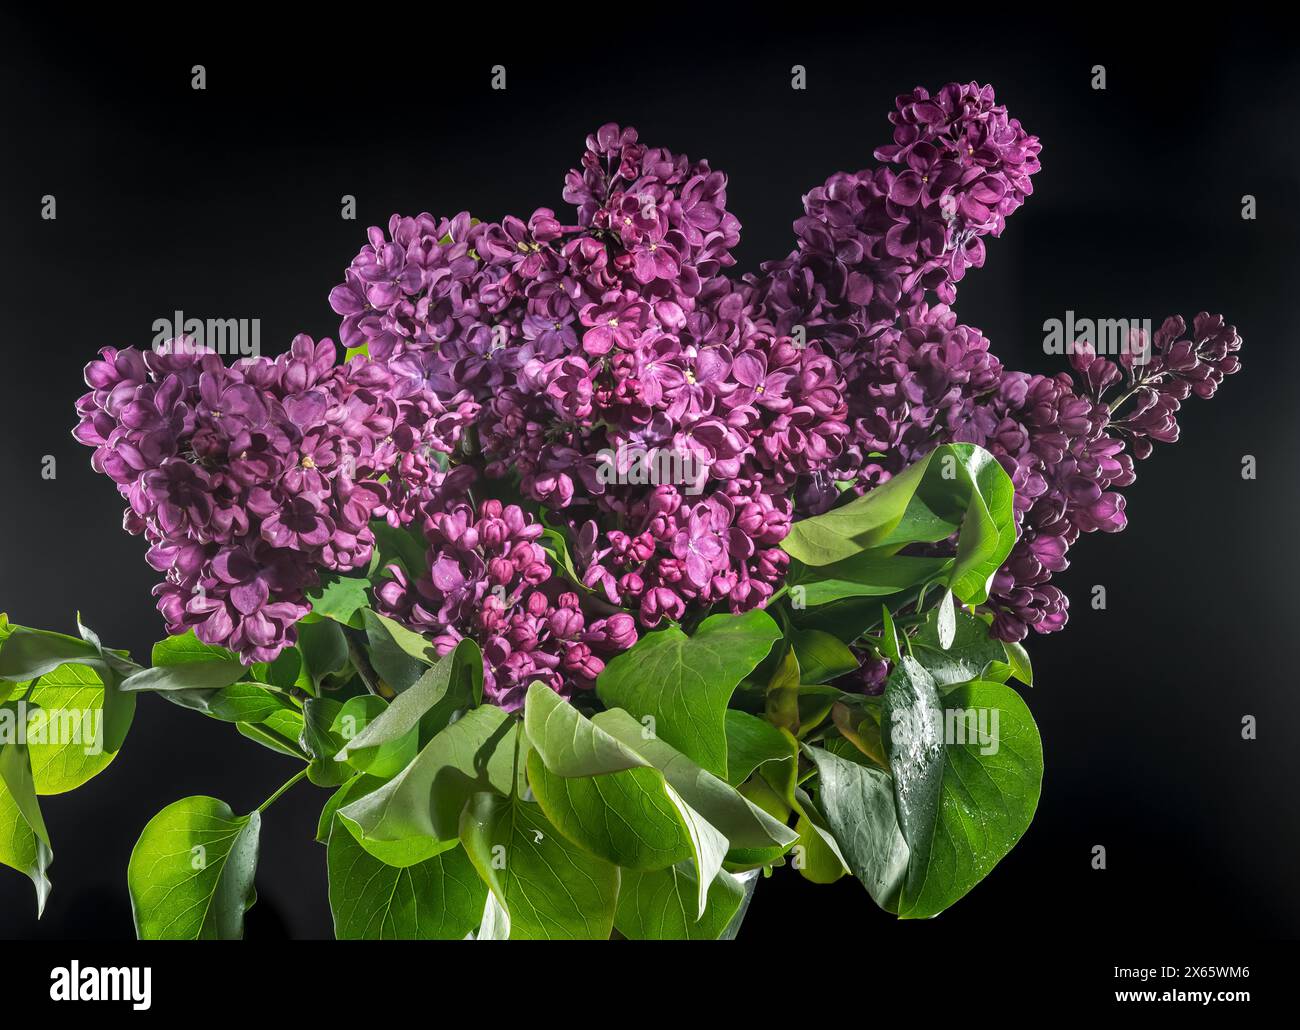 Blooming dark purple lilac on a black background Stock Photo